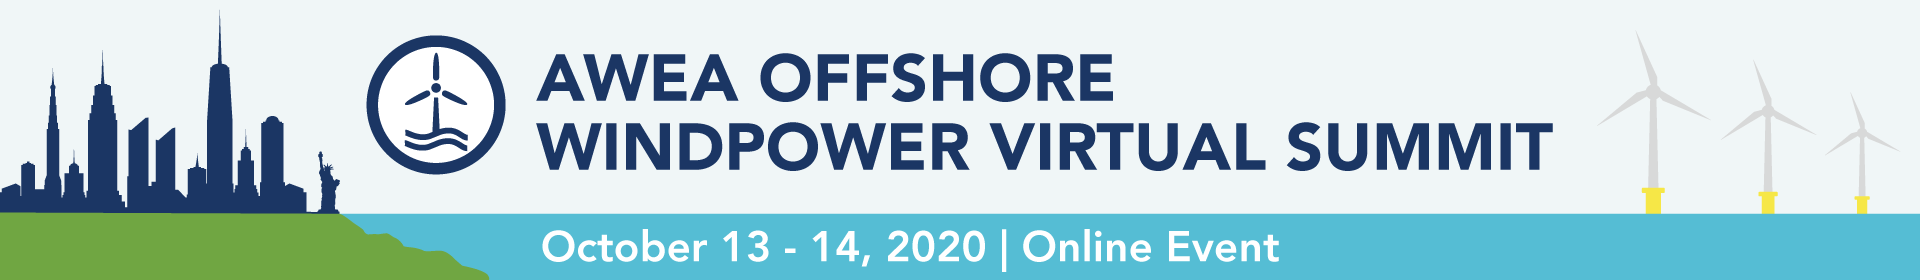 AWEA Offshore WINDPOWER Conference and Exhibition 2020 Event Banner